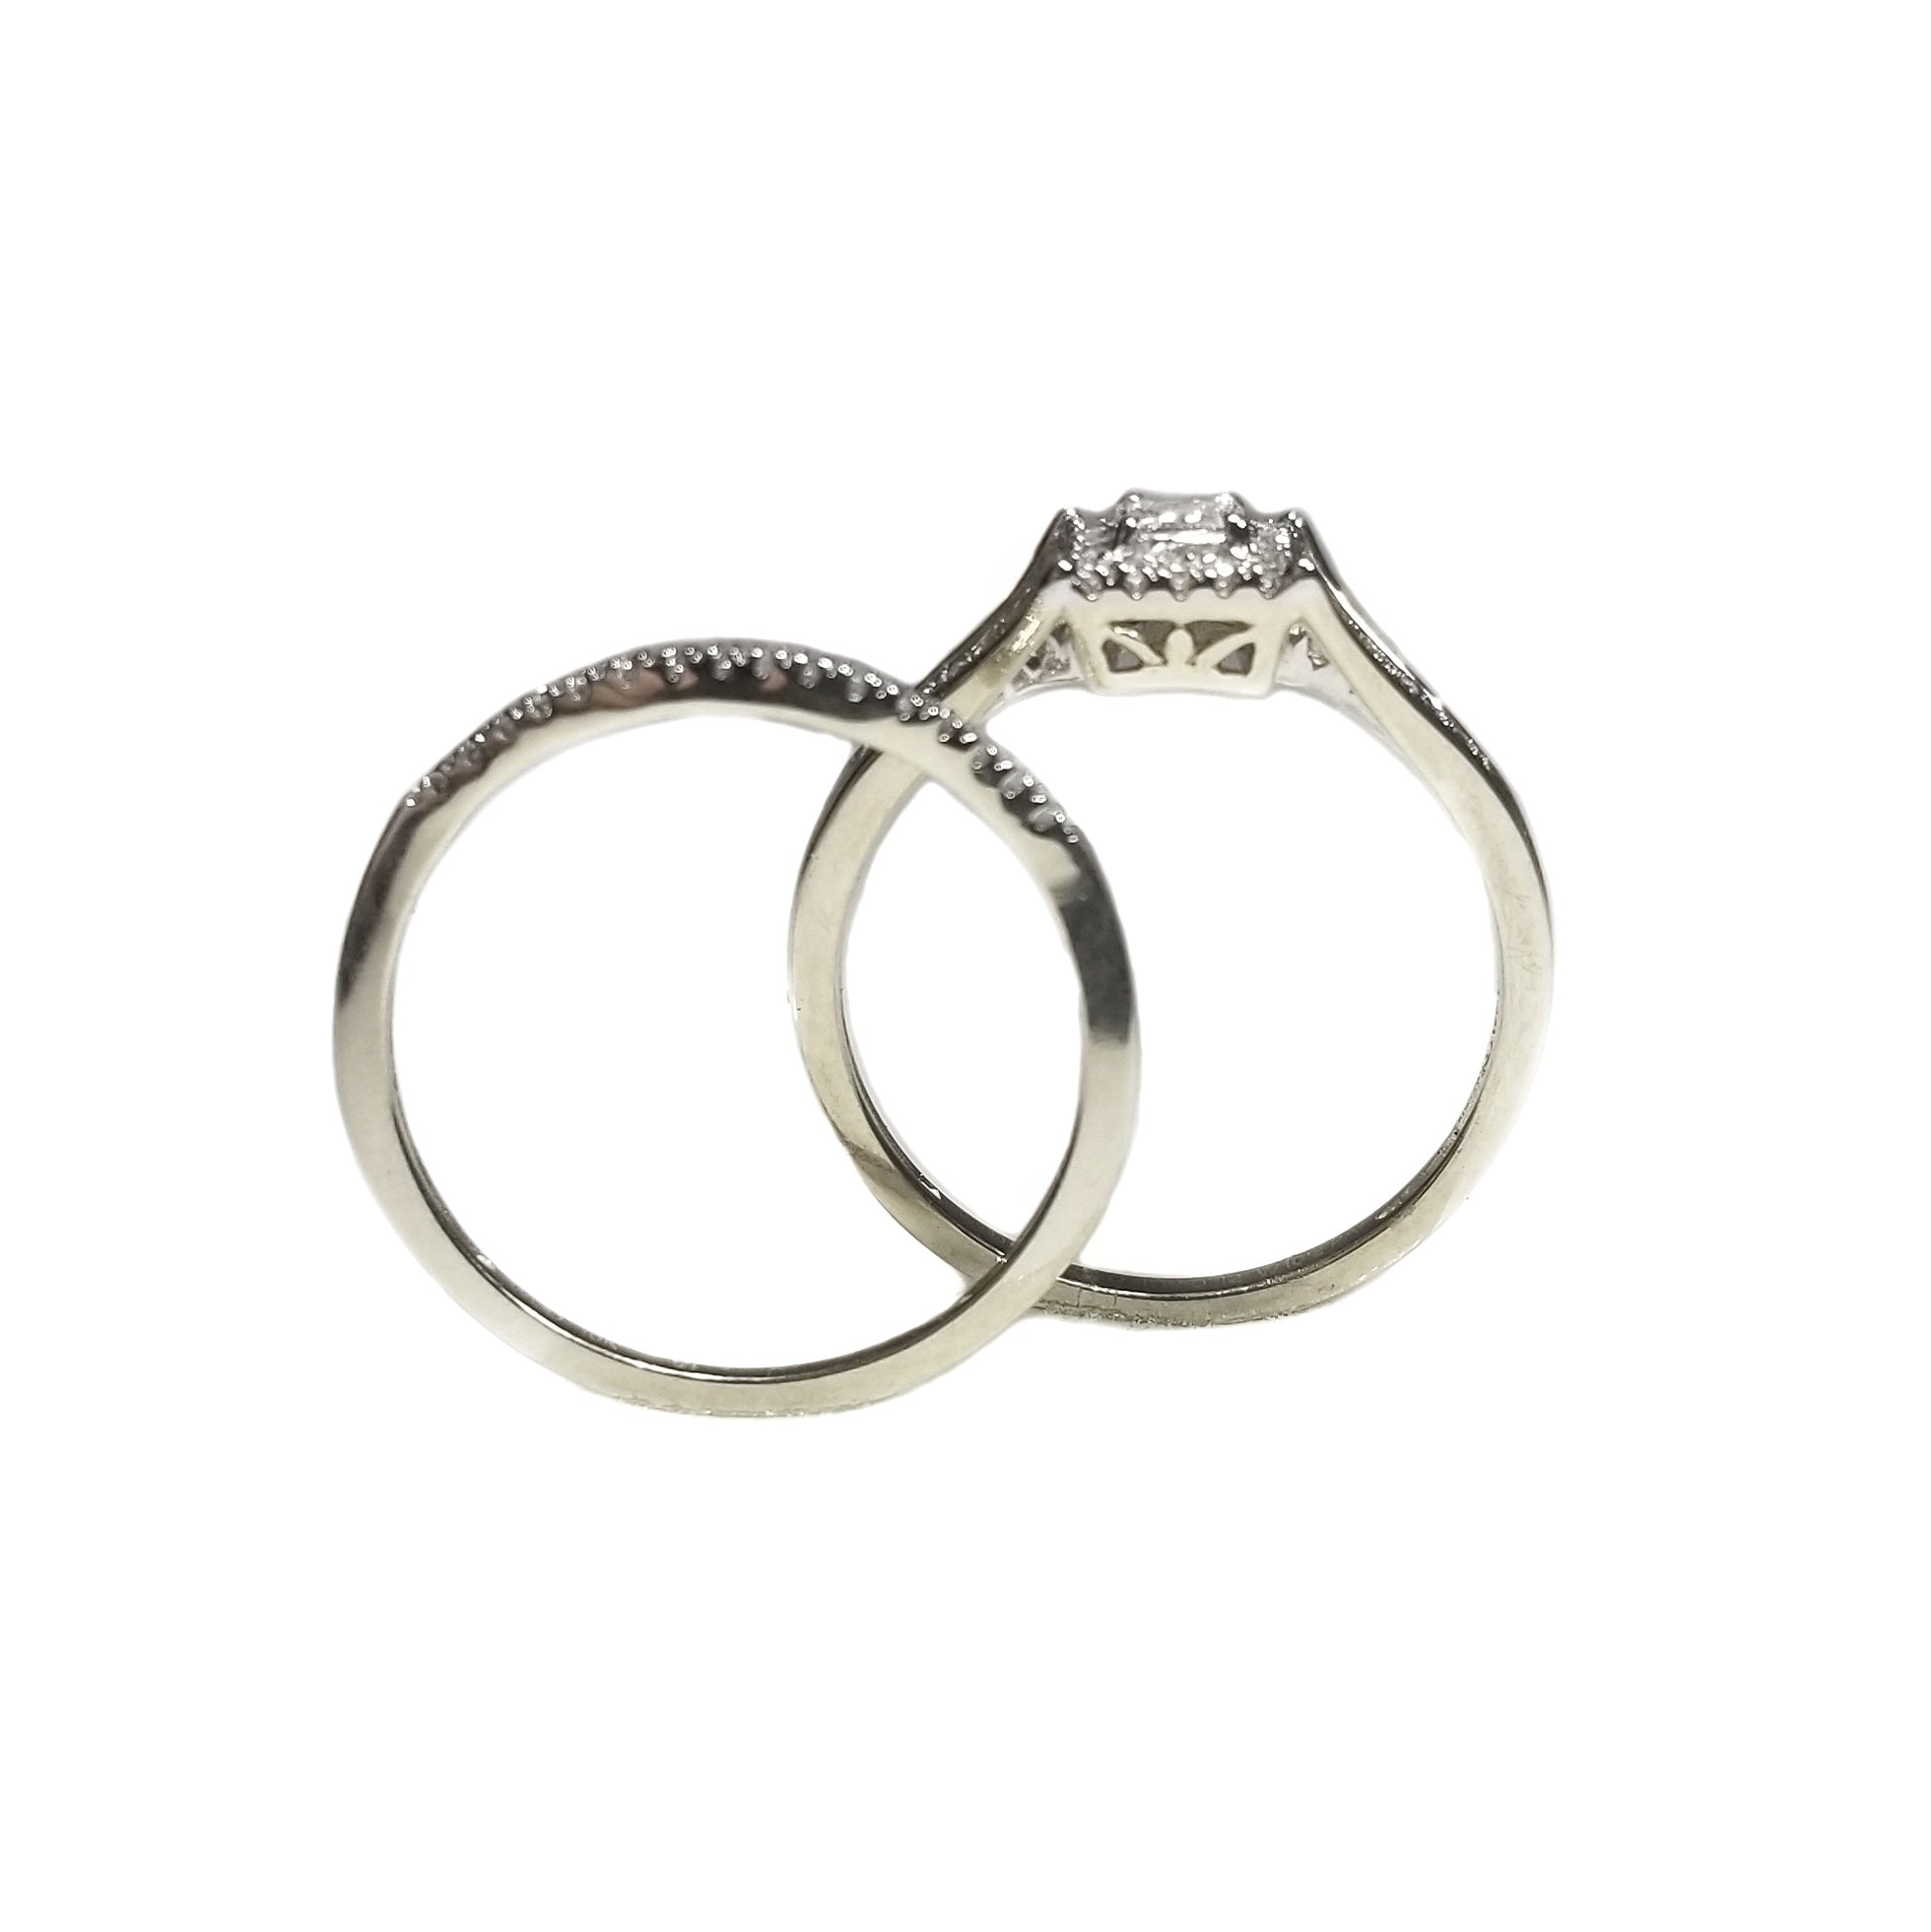 Engagement ring and wedding band duo set in 10k white gold